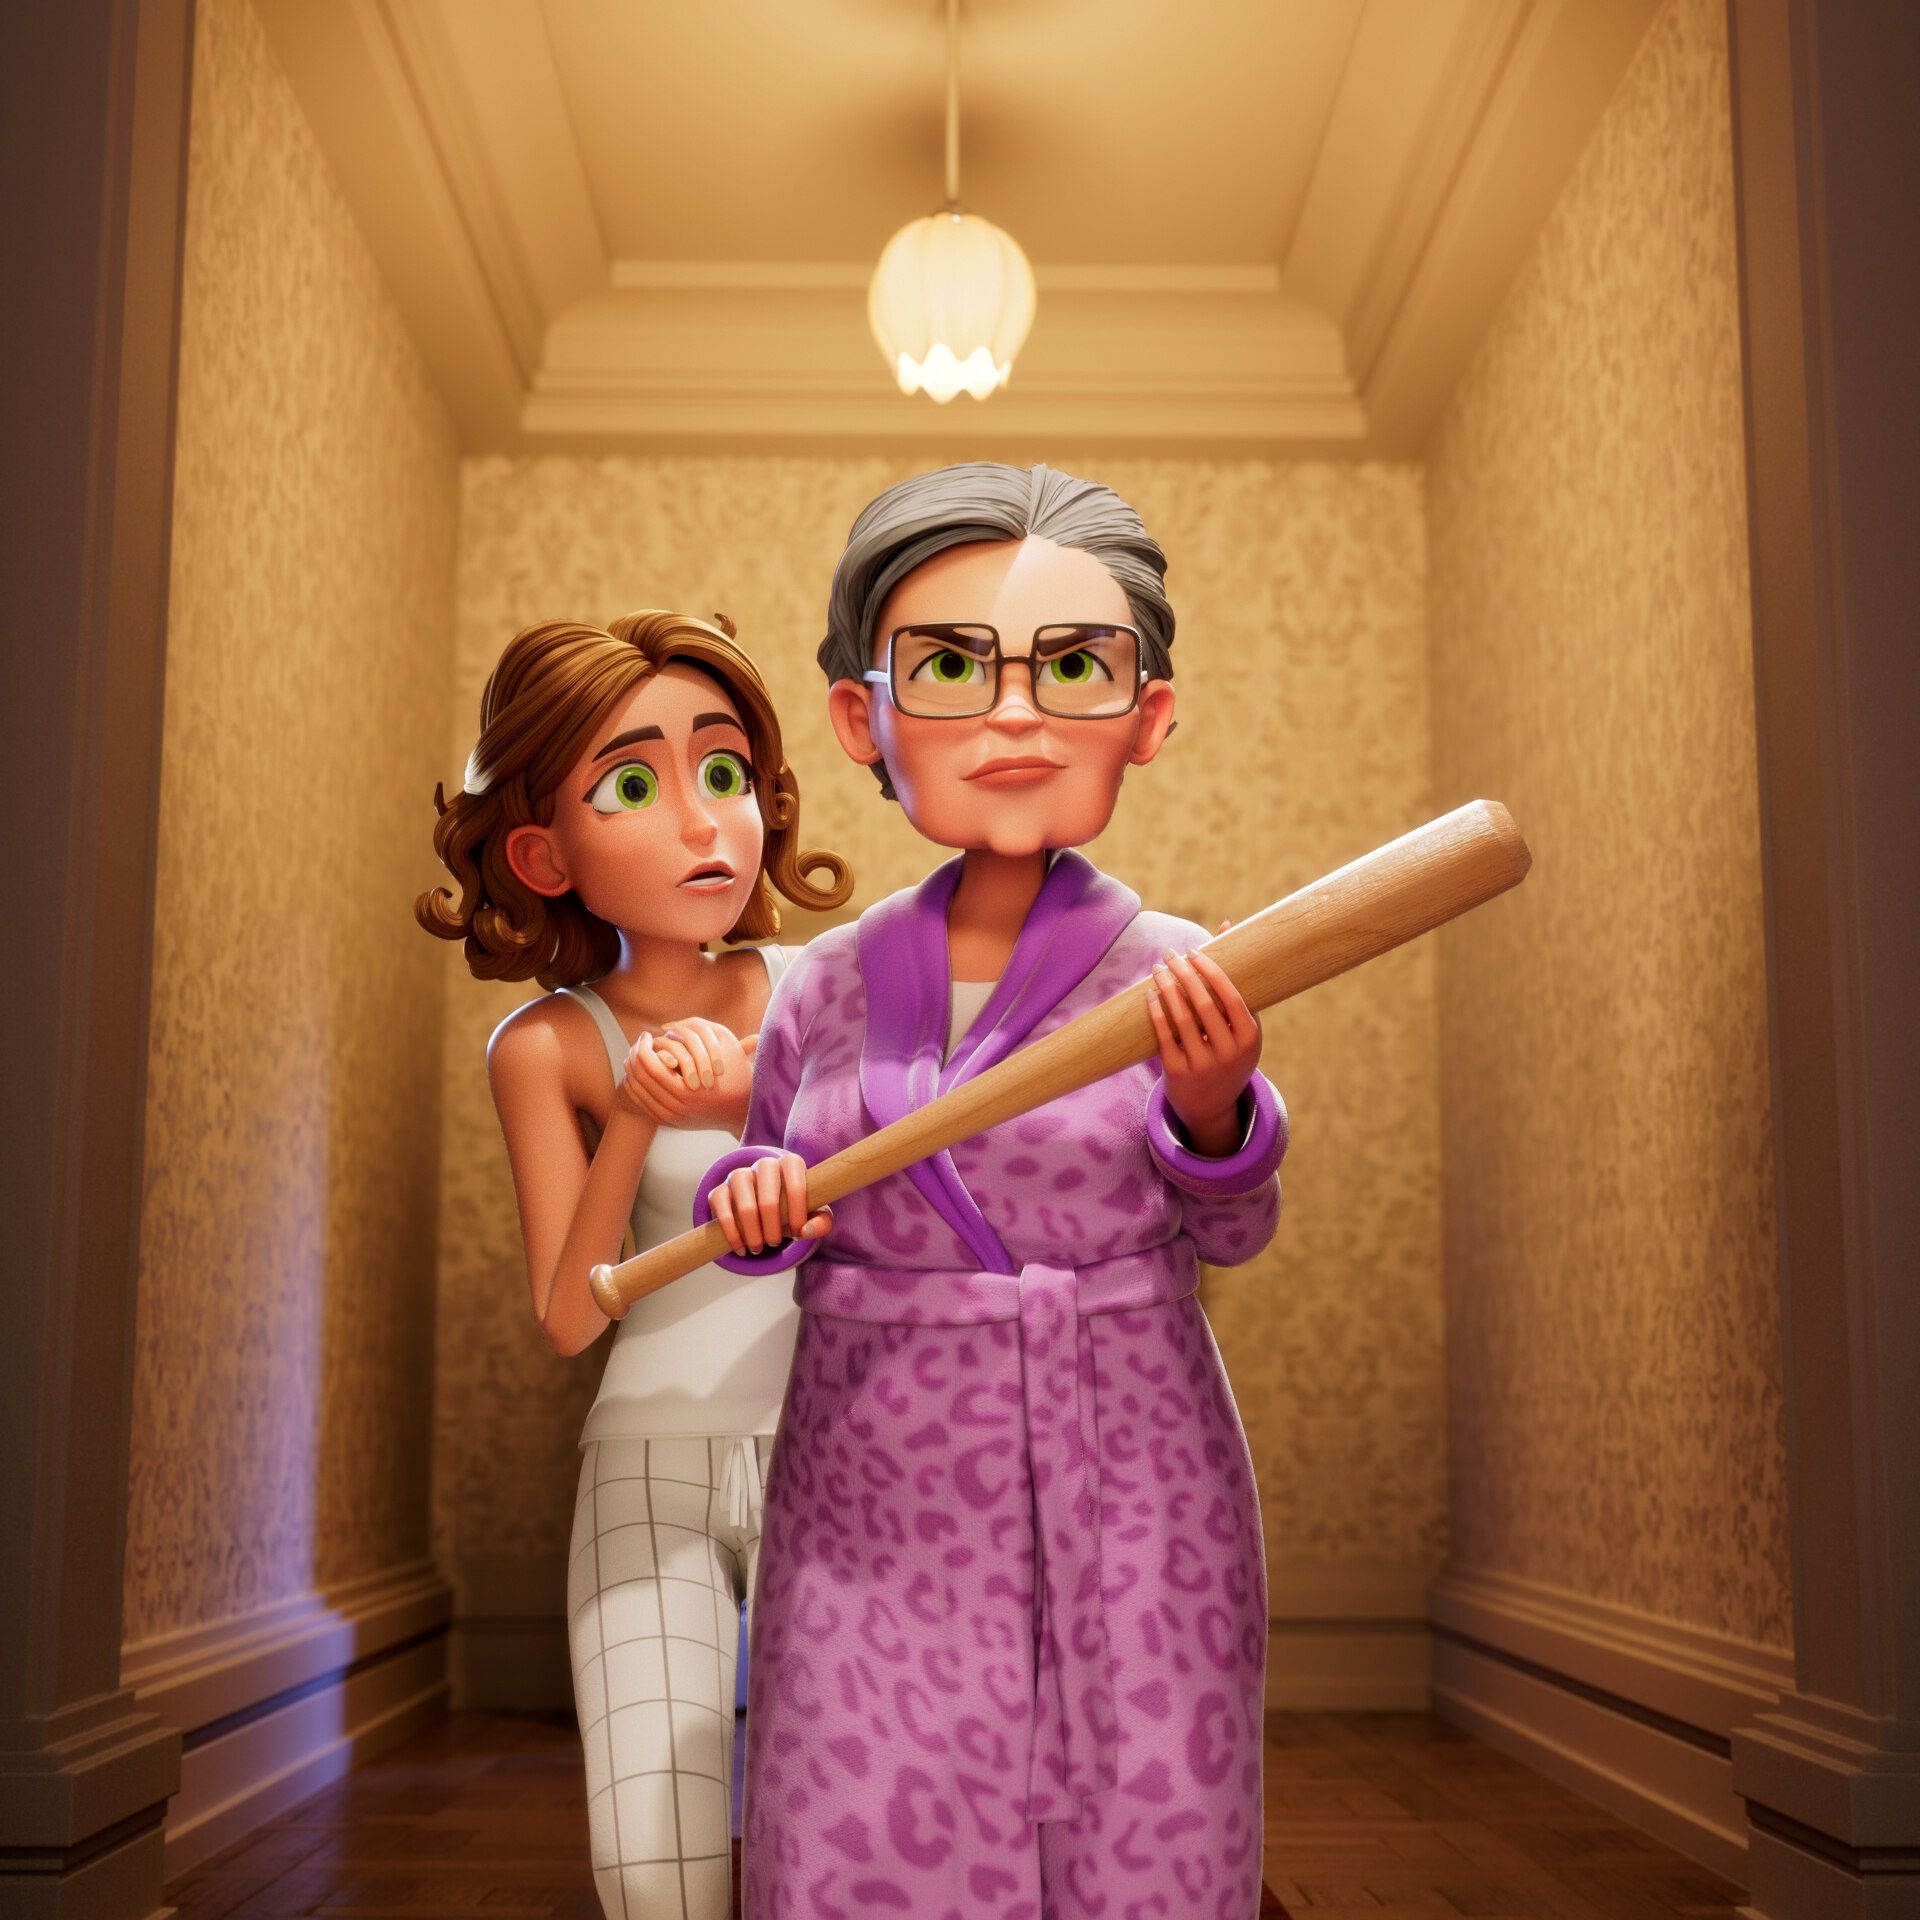 Maddie cowering in fear behind a protective Grandma carrying a baseball bat